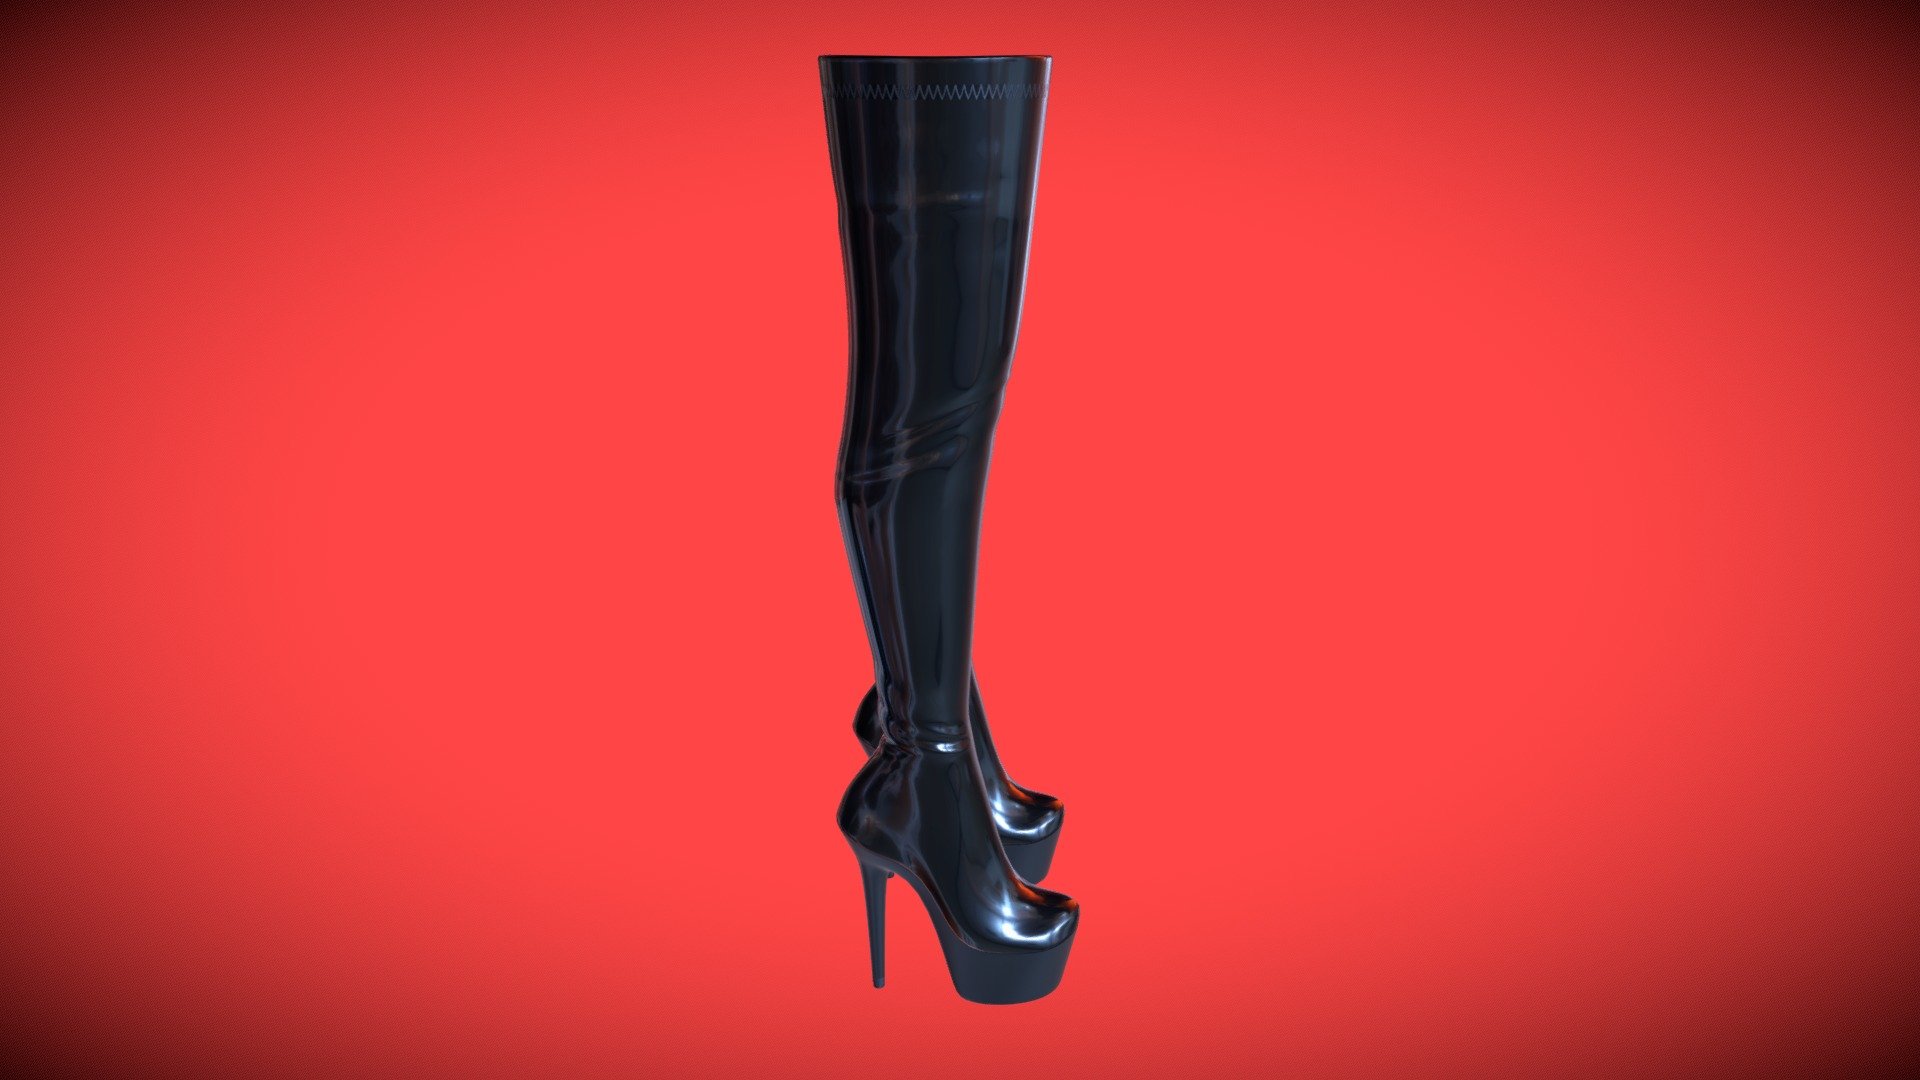 3D model of a pair of female high knee boots.
Whole model is textured, with fully unwrapped UVs. 4096x4096 PNG texture maps are provided (color, roughness, normal, specular).
Model consists of 24464 faces and 24598 vertices. 
Project also includes original .blend file with unapplied modifiers, non destructive workflow, procedural materials, and separate properly named objects.
Model is carefully shaped with accurate proportions. Clean and optimised topology is used for maximum polygon efficiency 3d model